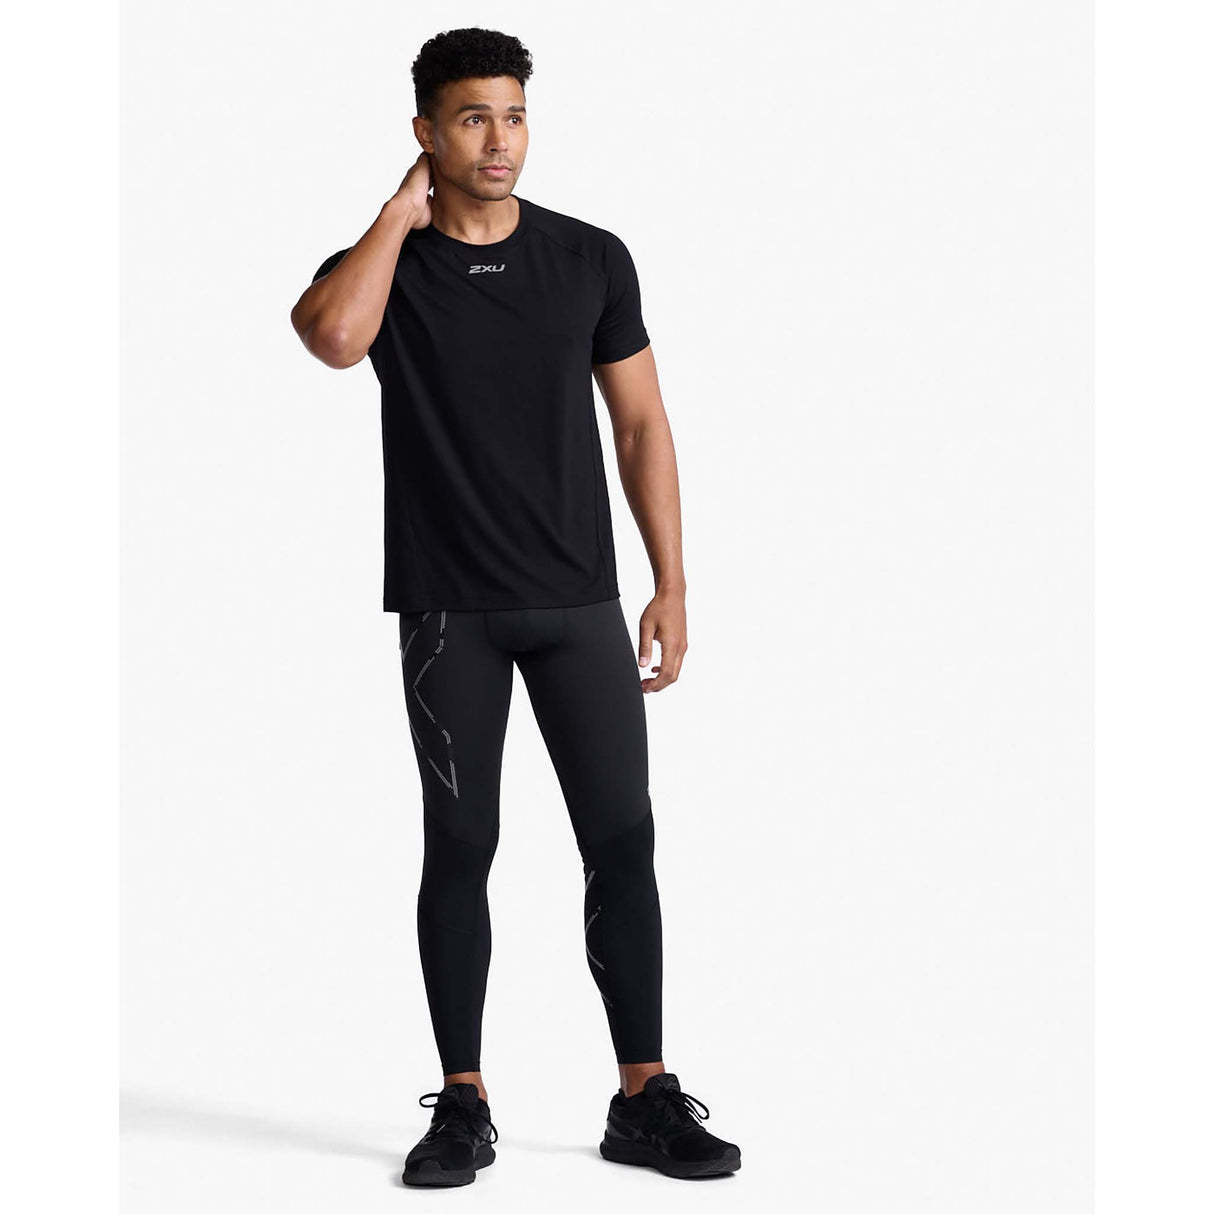 2XU Ignition Base Layer Tee noir homme live